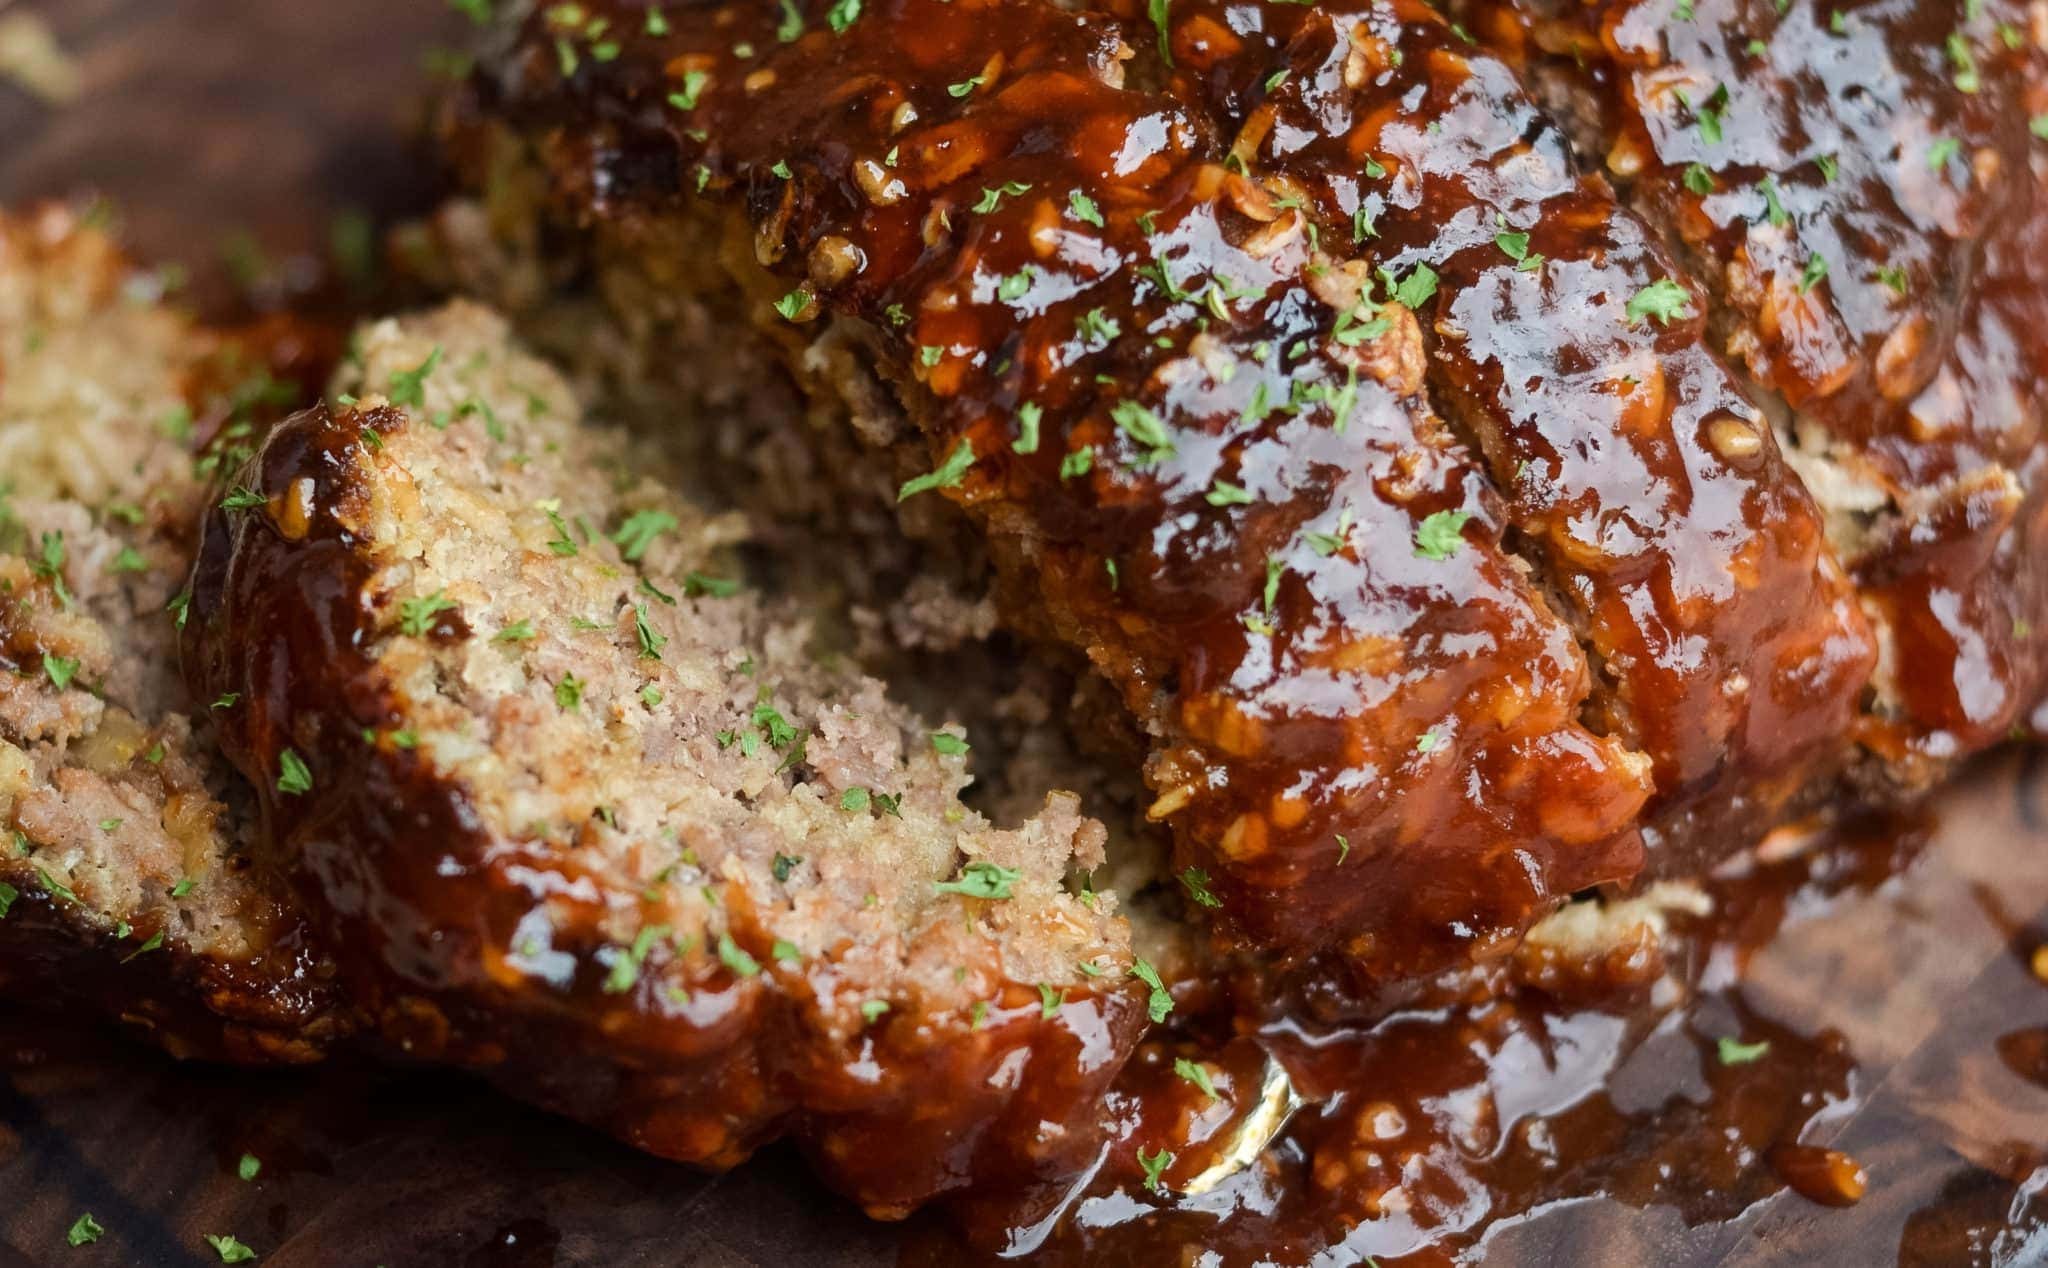 How to make St. Louis ribs in the Instant Pot